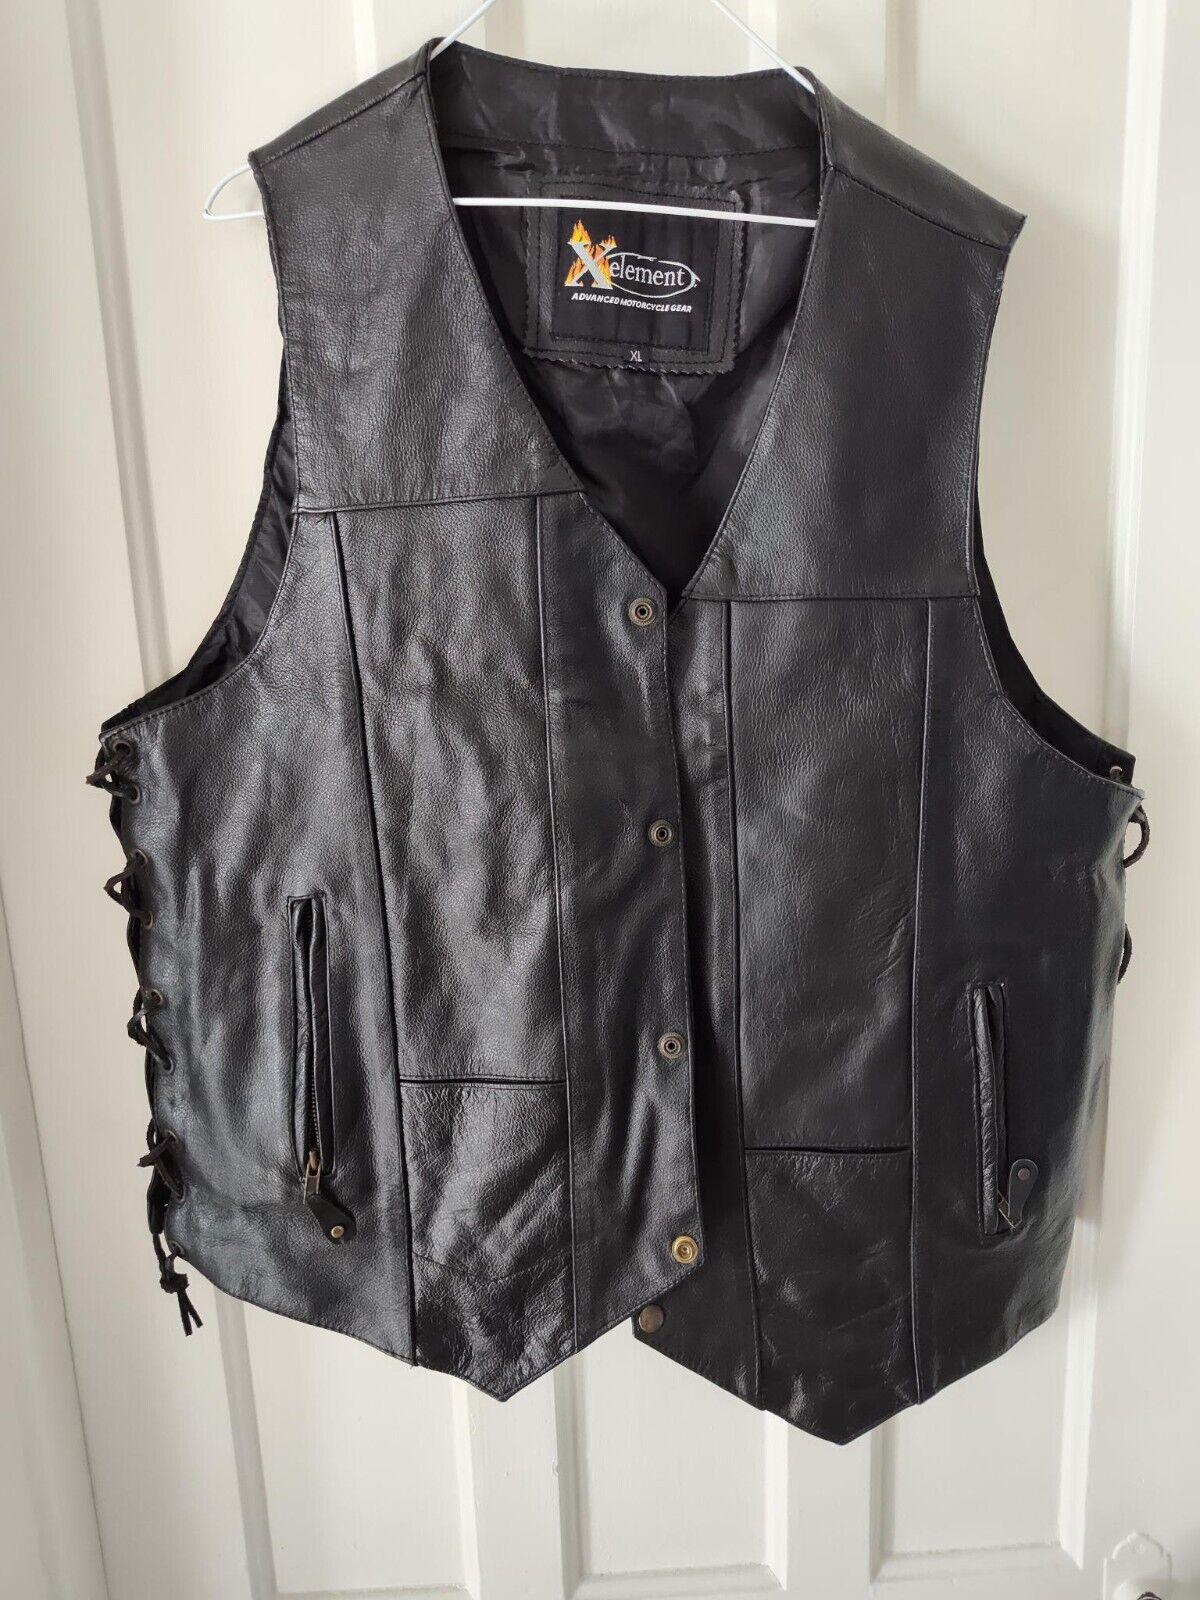 XElement Men\'s Black Leather Motorcycle Vest. concealed carry. Size XL